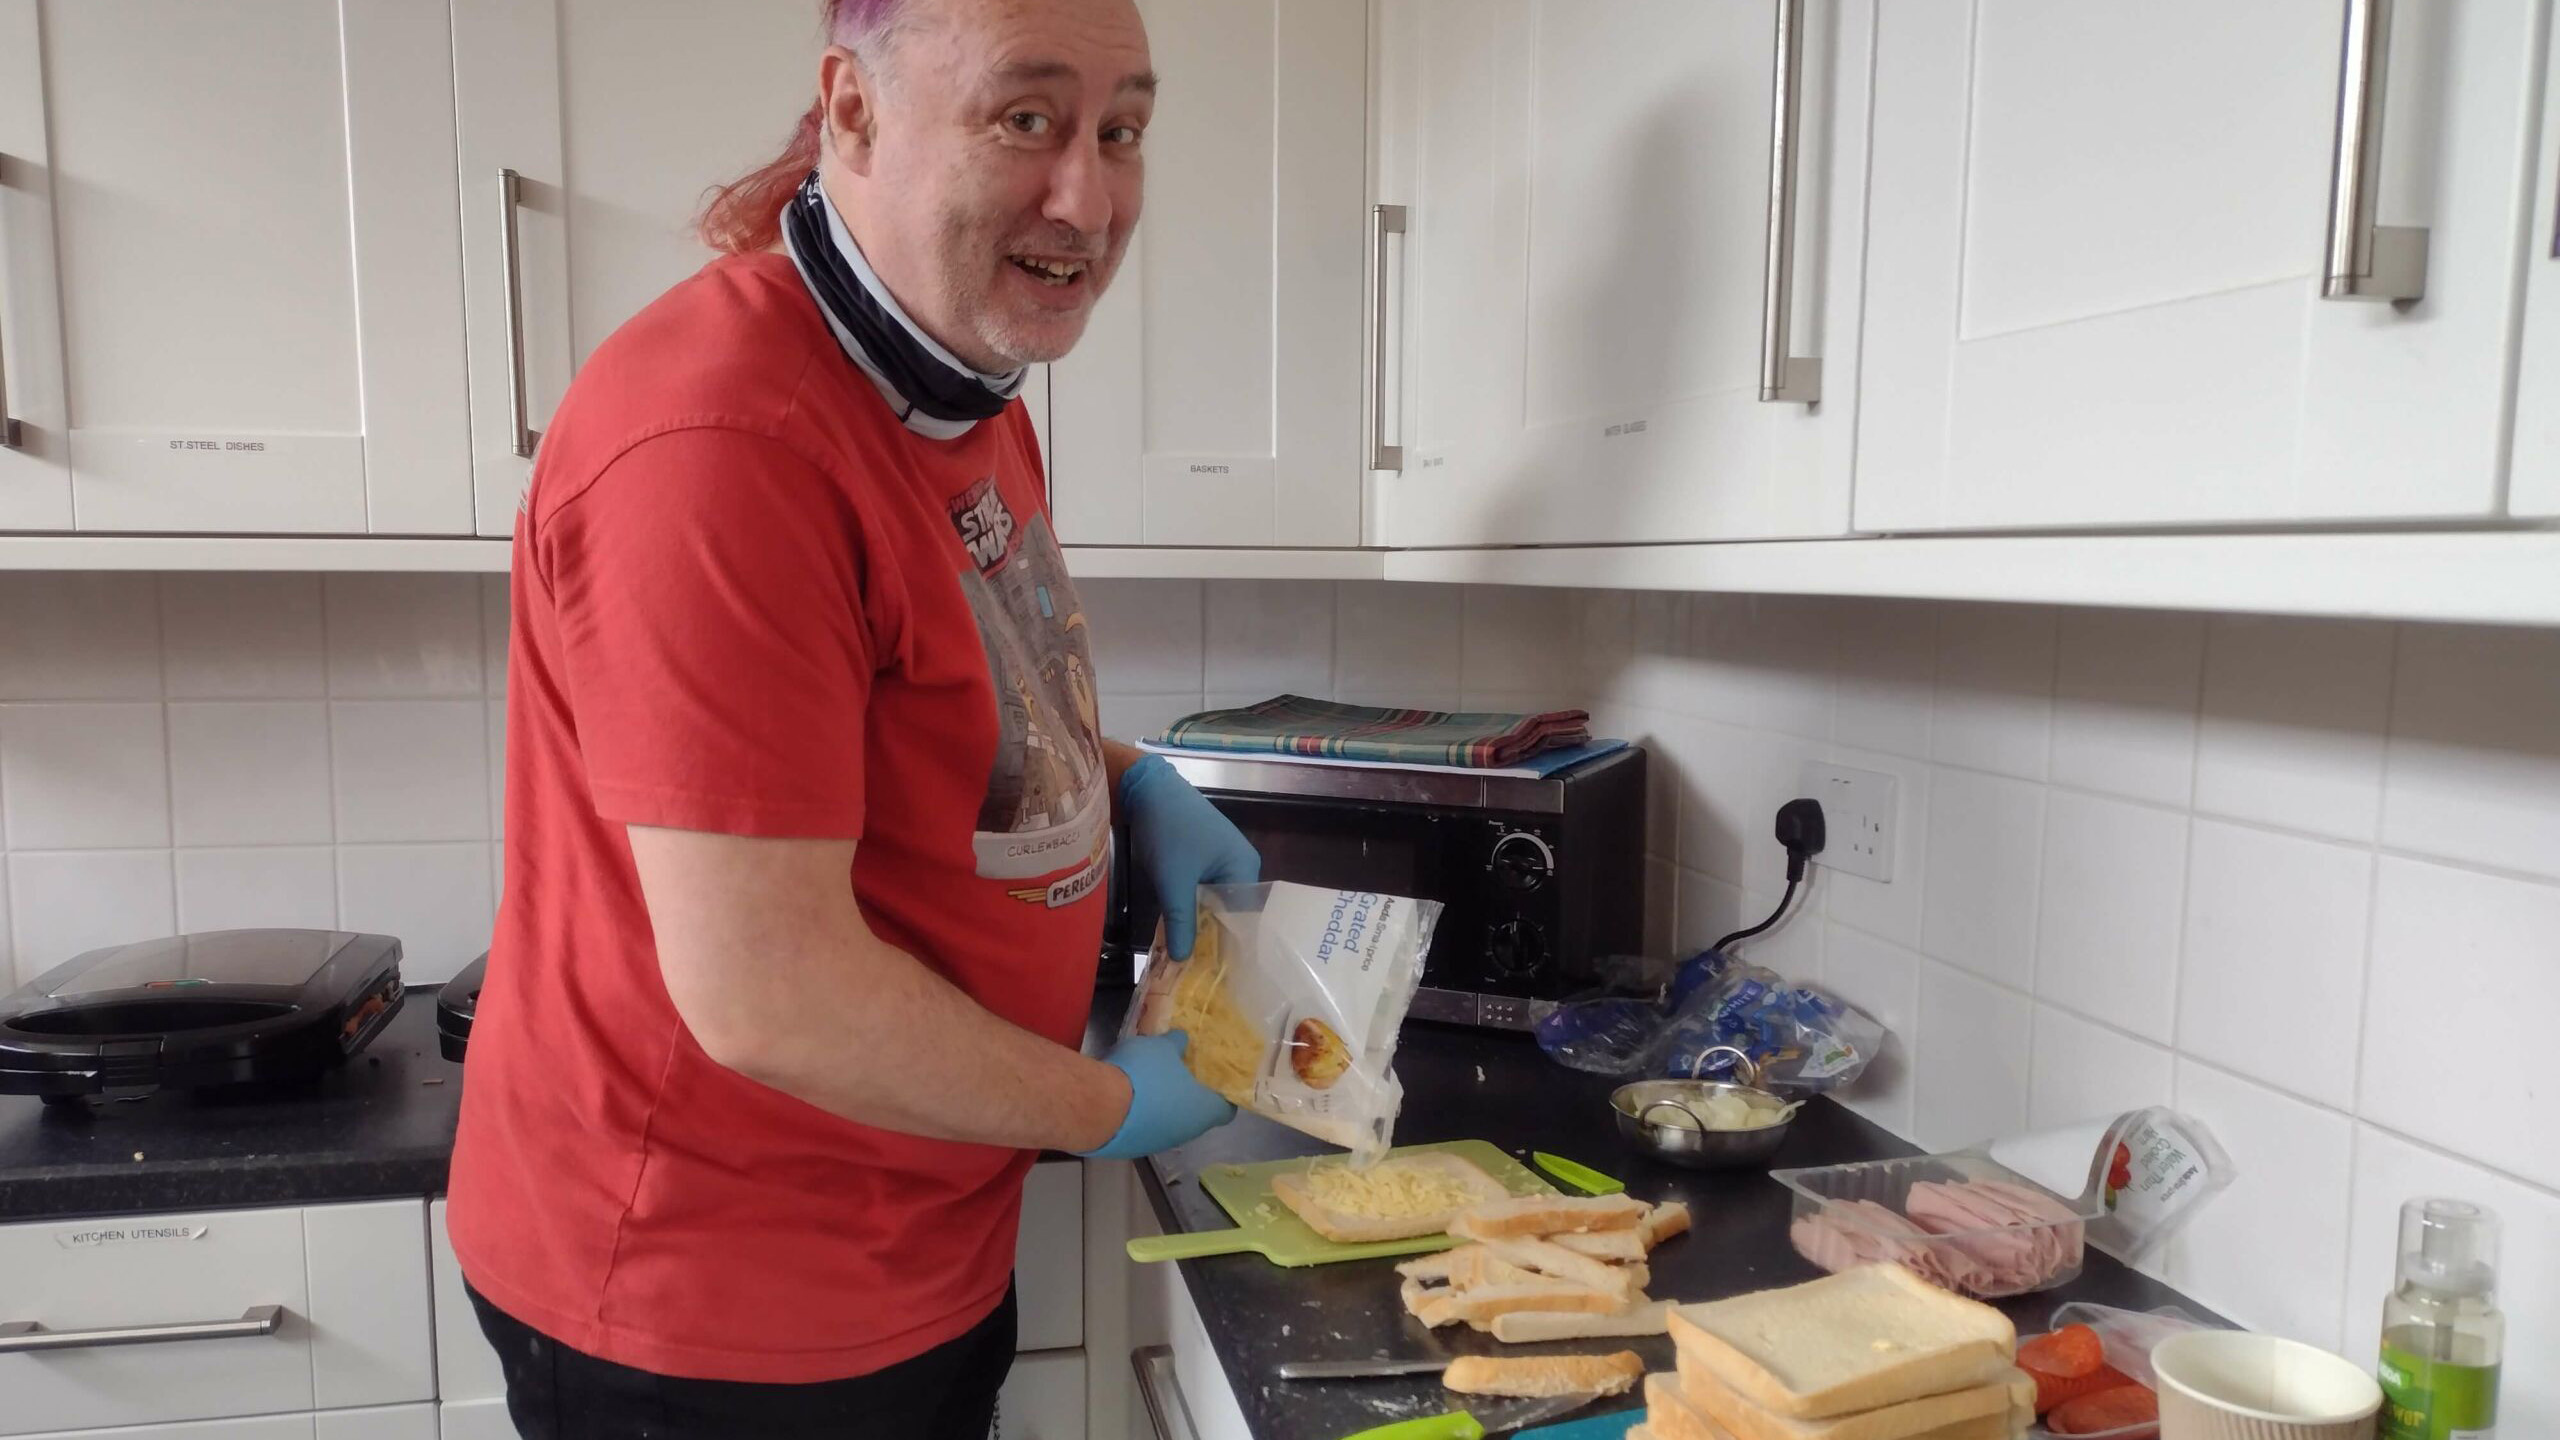 A man smiling while making cheese toasties